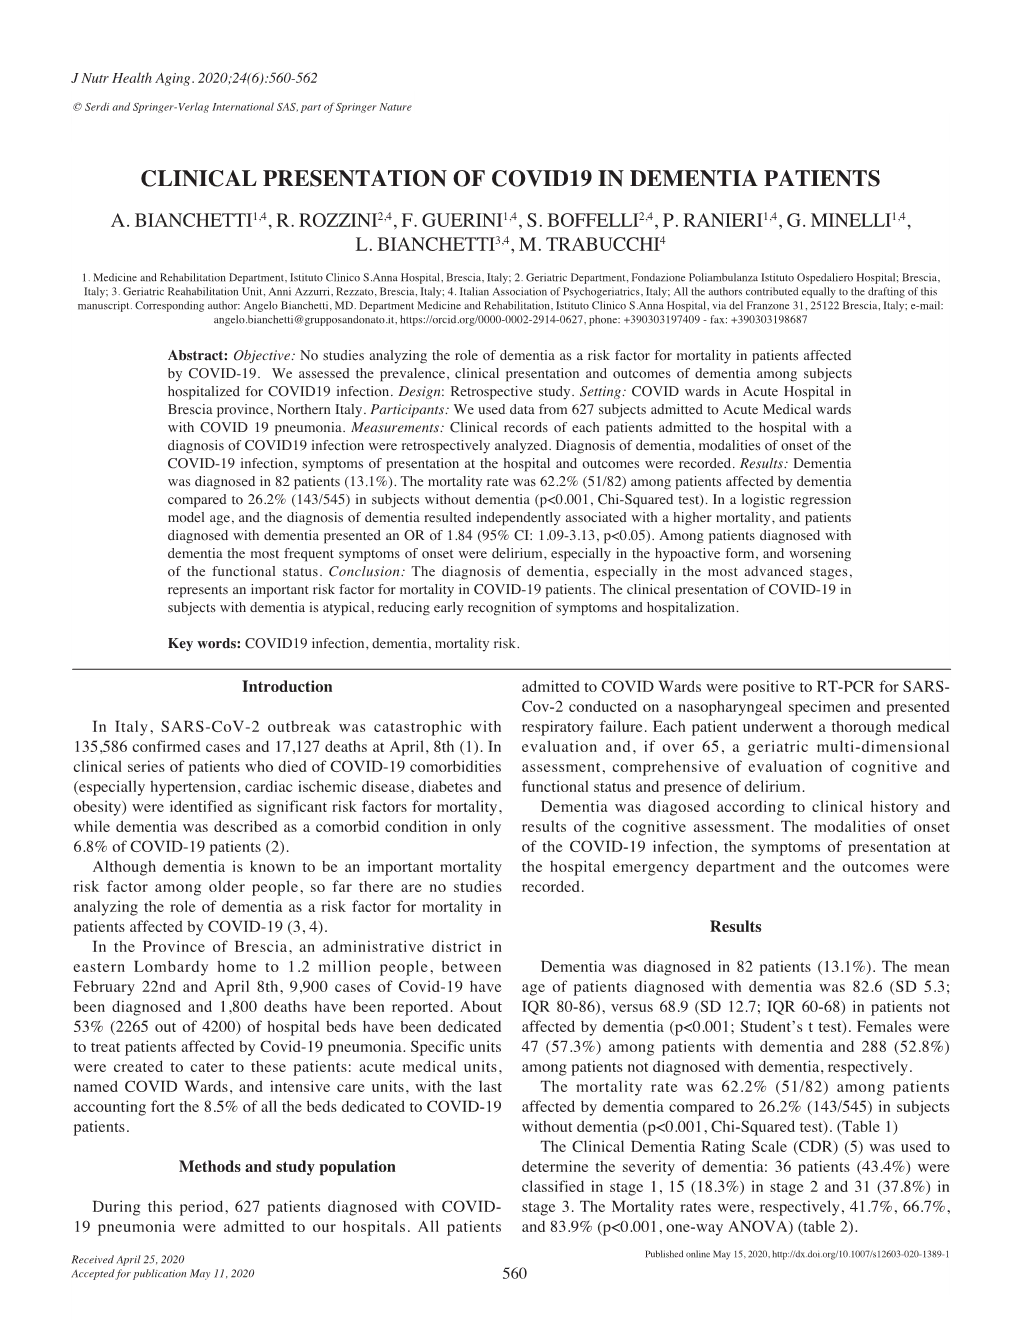 Clinical Presentation of Covid19 in Dementia Patients A